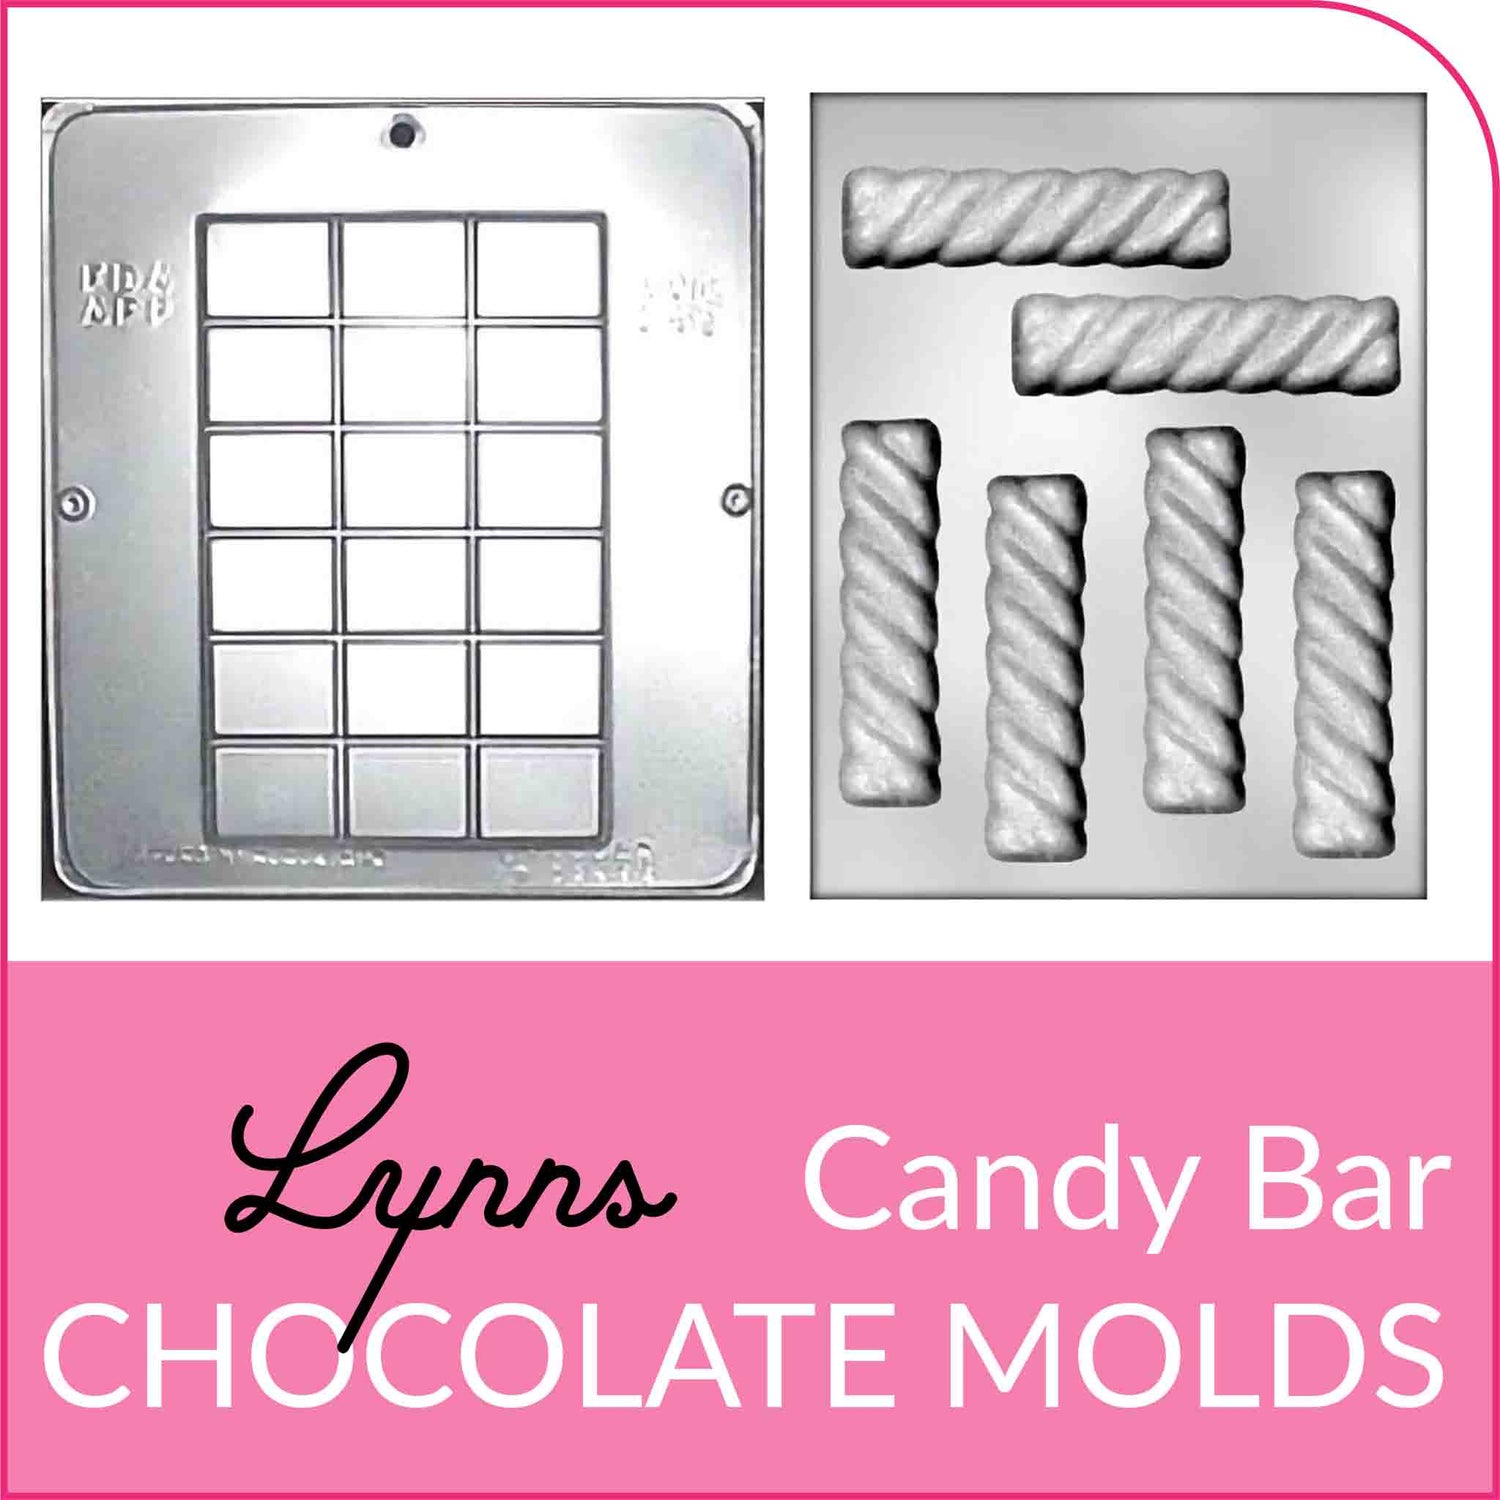 Shop Chocolate Candy Bars Molds from Lynn's